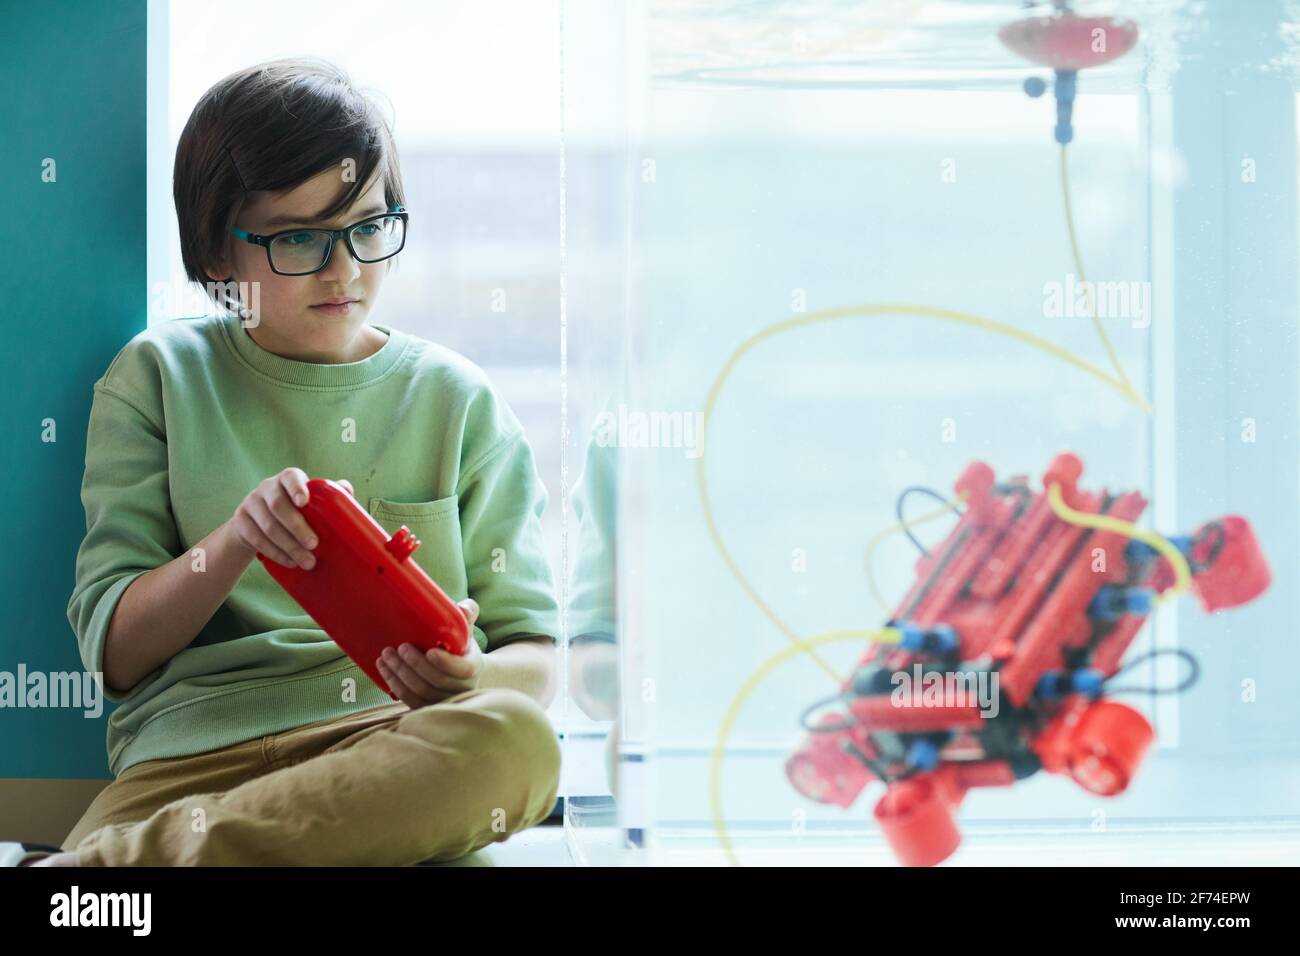 Portrait of smart boy operating robotic boat in water tank while experimenting in engineering lab at school, copy space Stock Photo